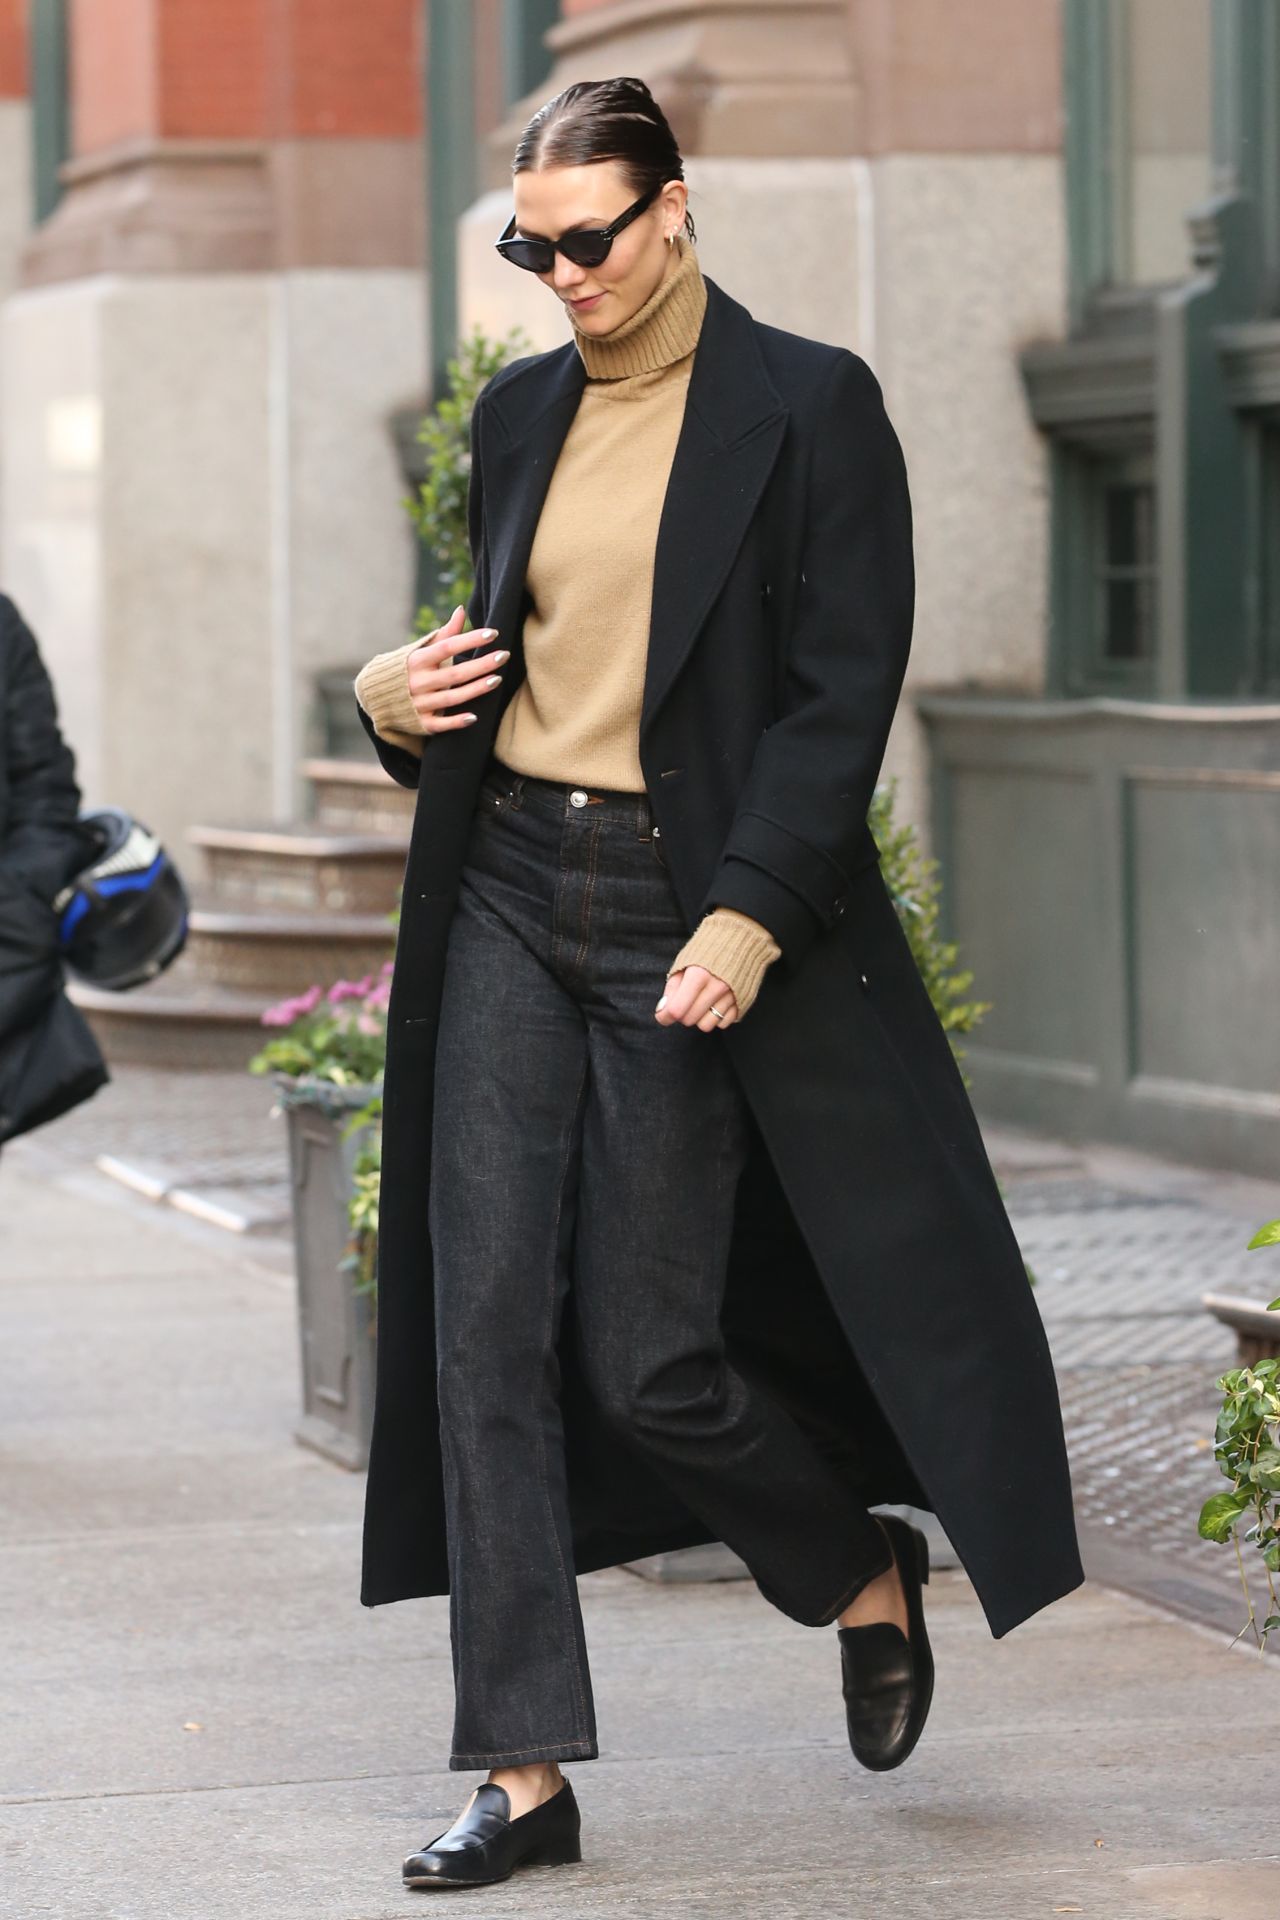 Karlie Kloss in a Tan Turtleneck, Black Jeans and Black Overcoat in NYC ...